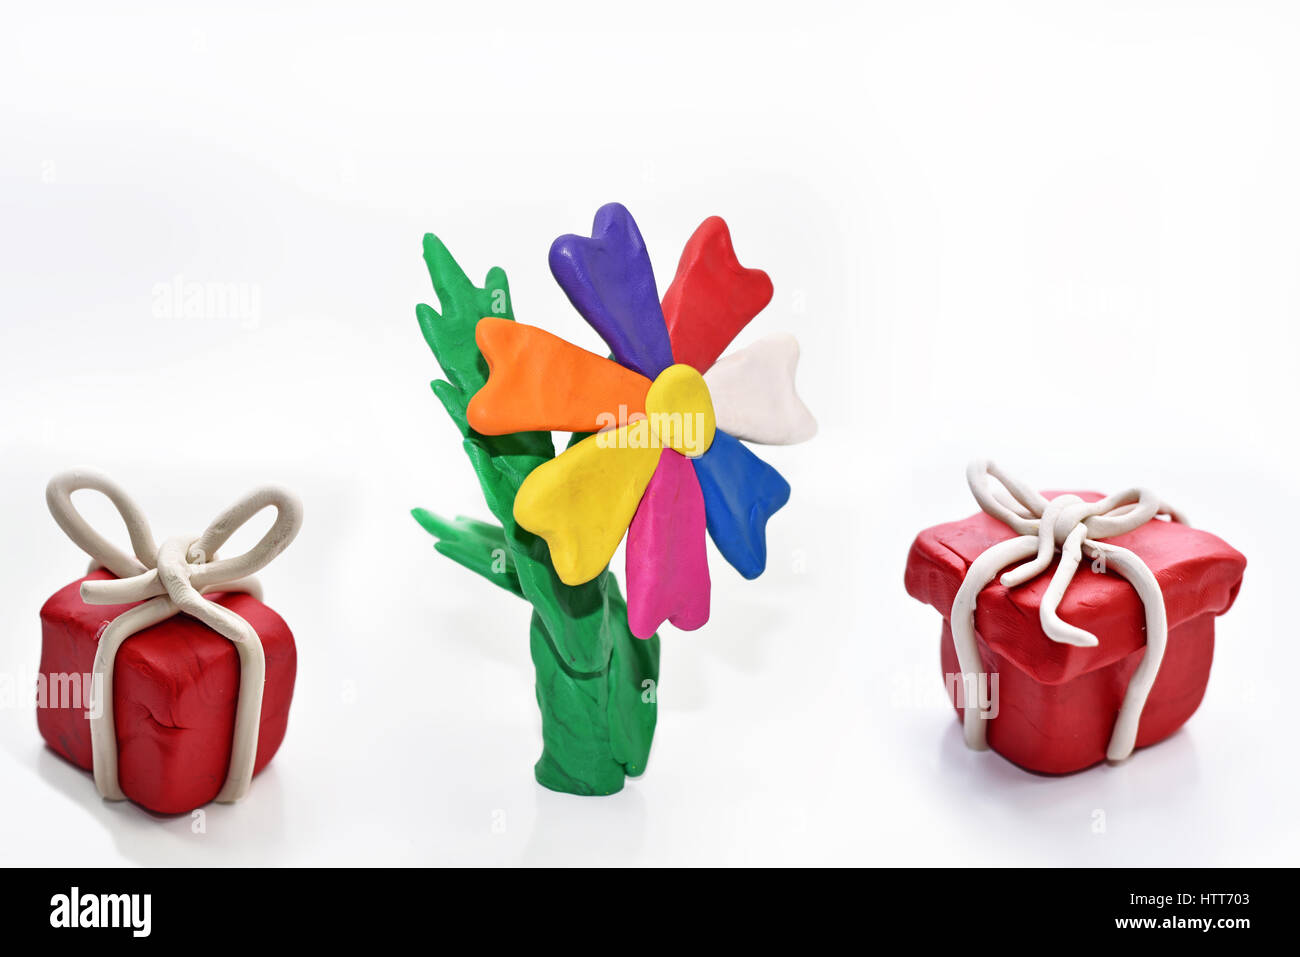 Red present with flower made from plasticine. Isolated on white background. Stock Photo